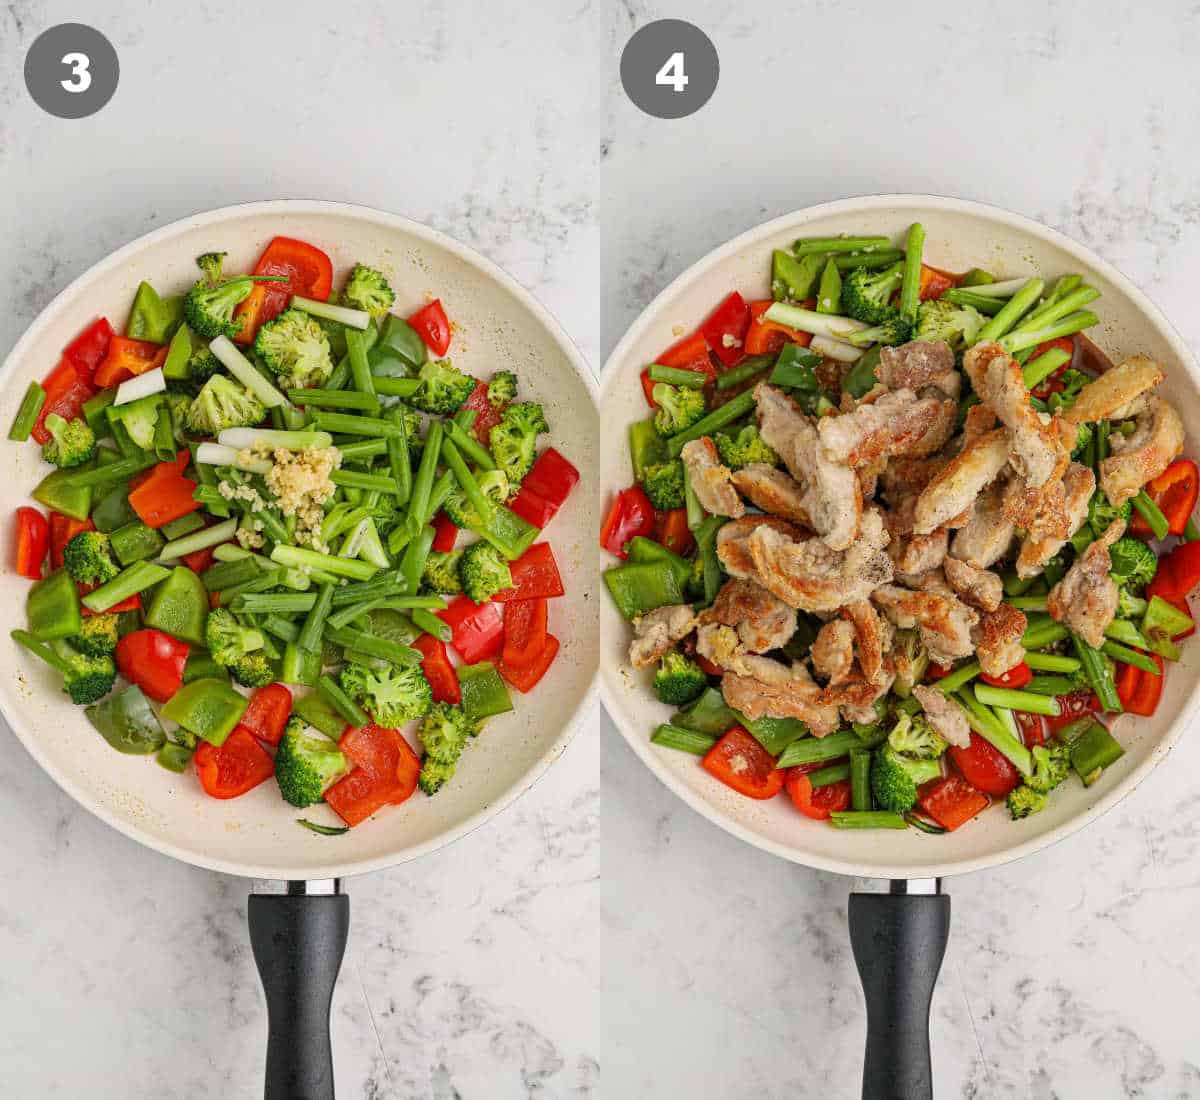 Two side by side images showing steps 3 and 4 of how to make hunan chicken.